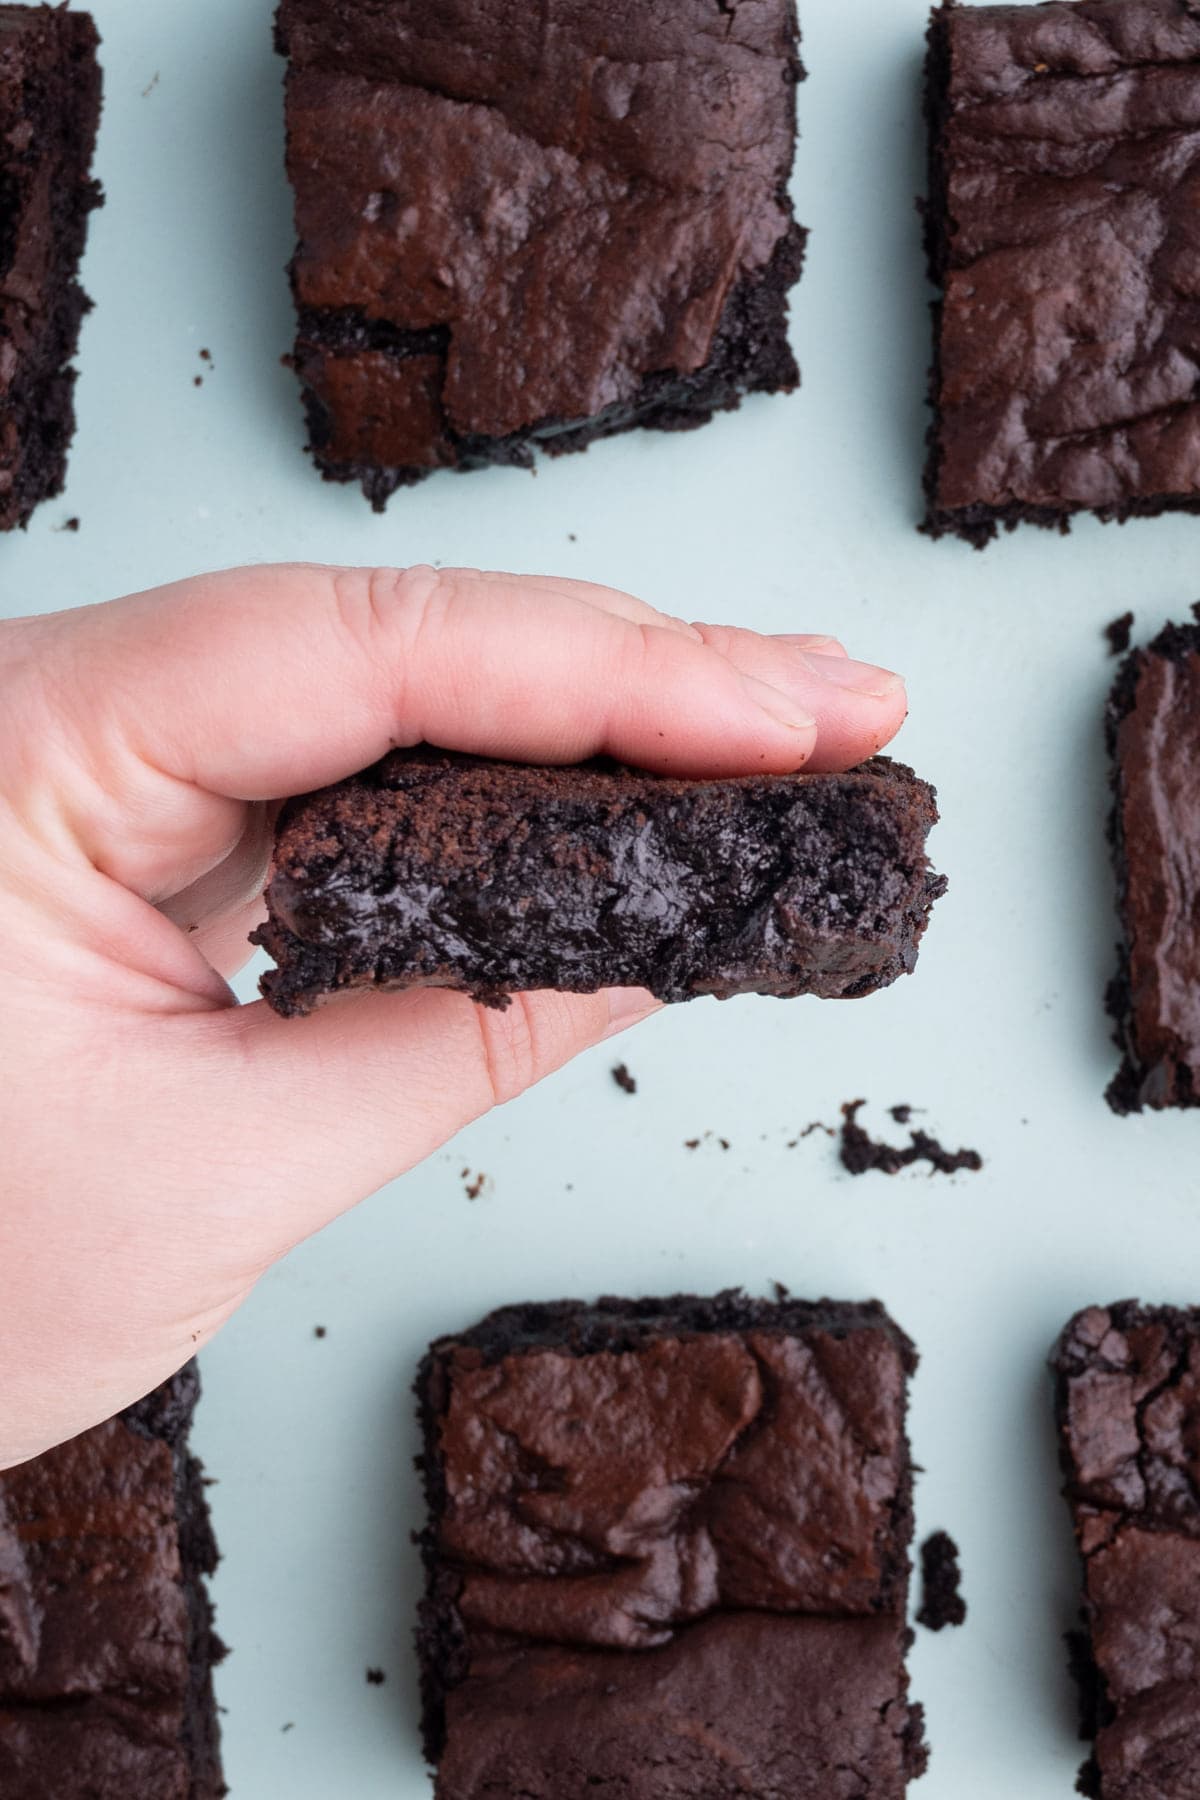 Holding an olive oil brownie in front of the camera to show close up of fudgy inside